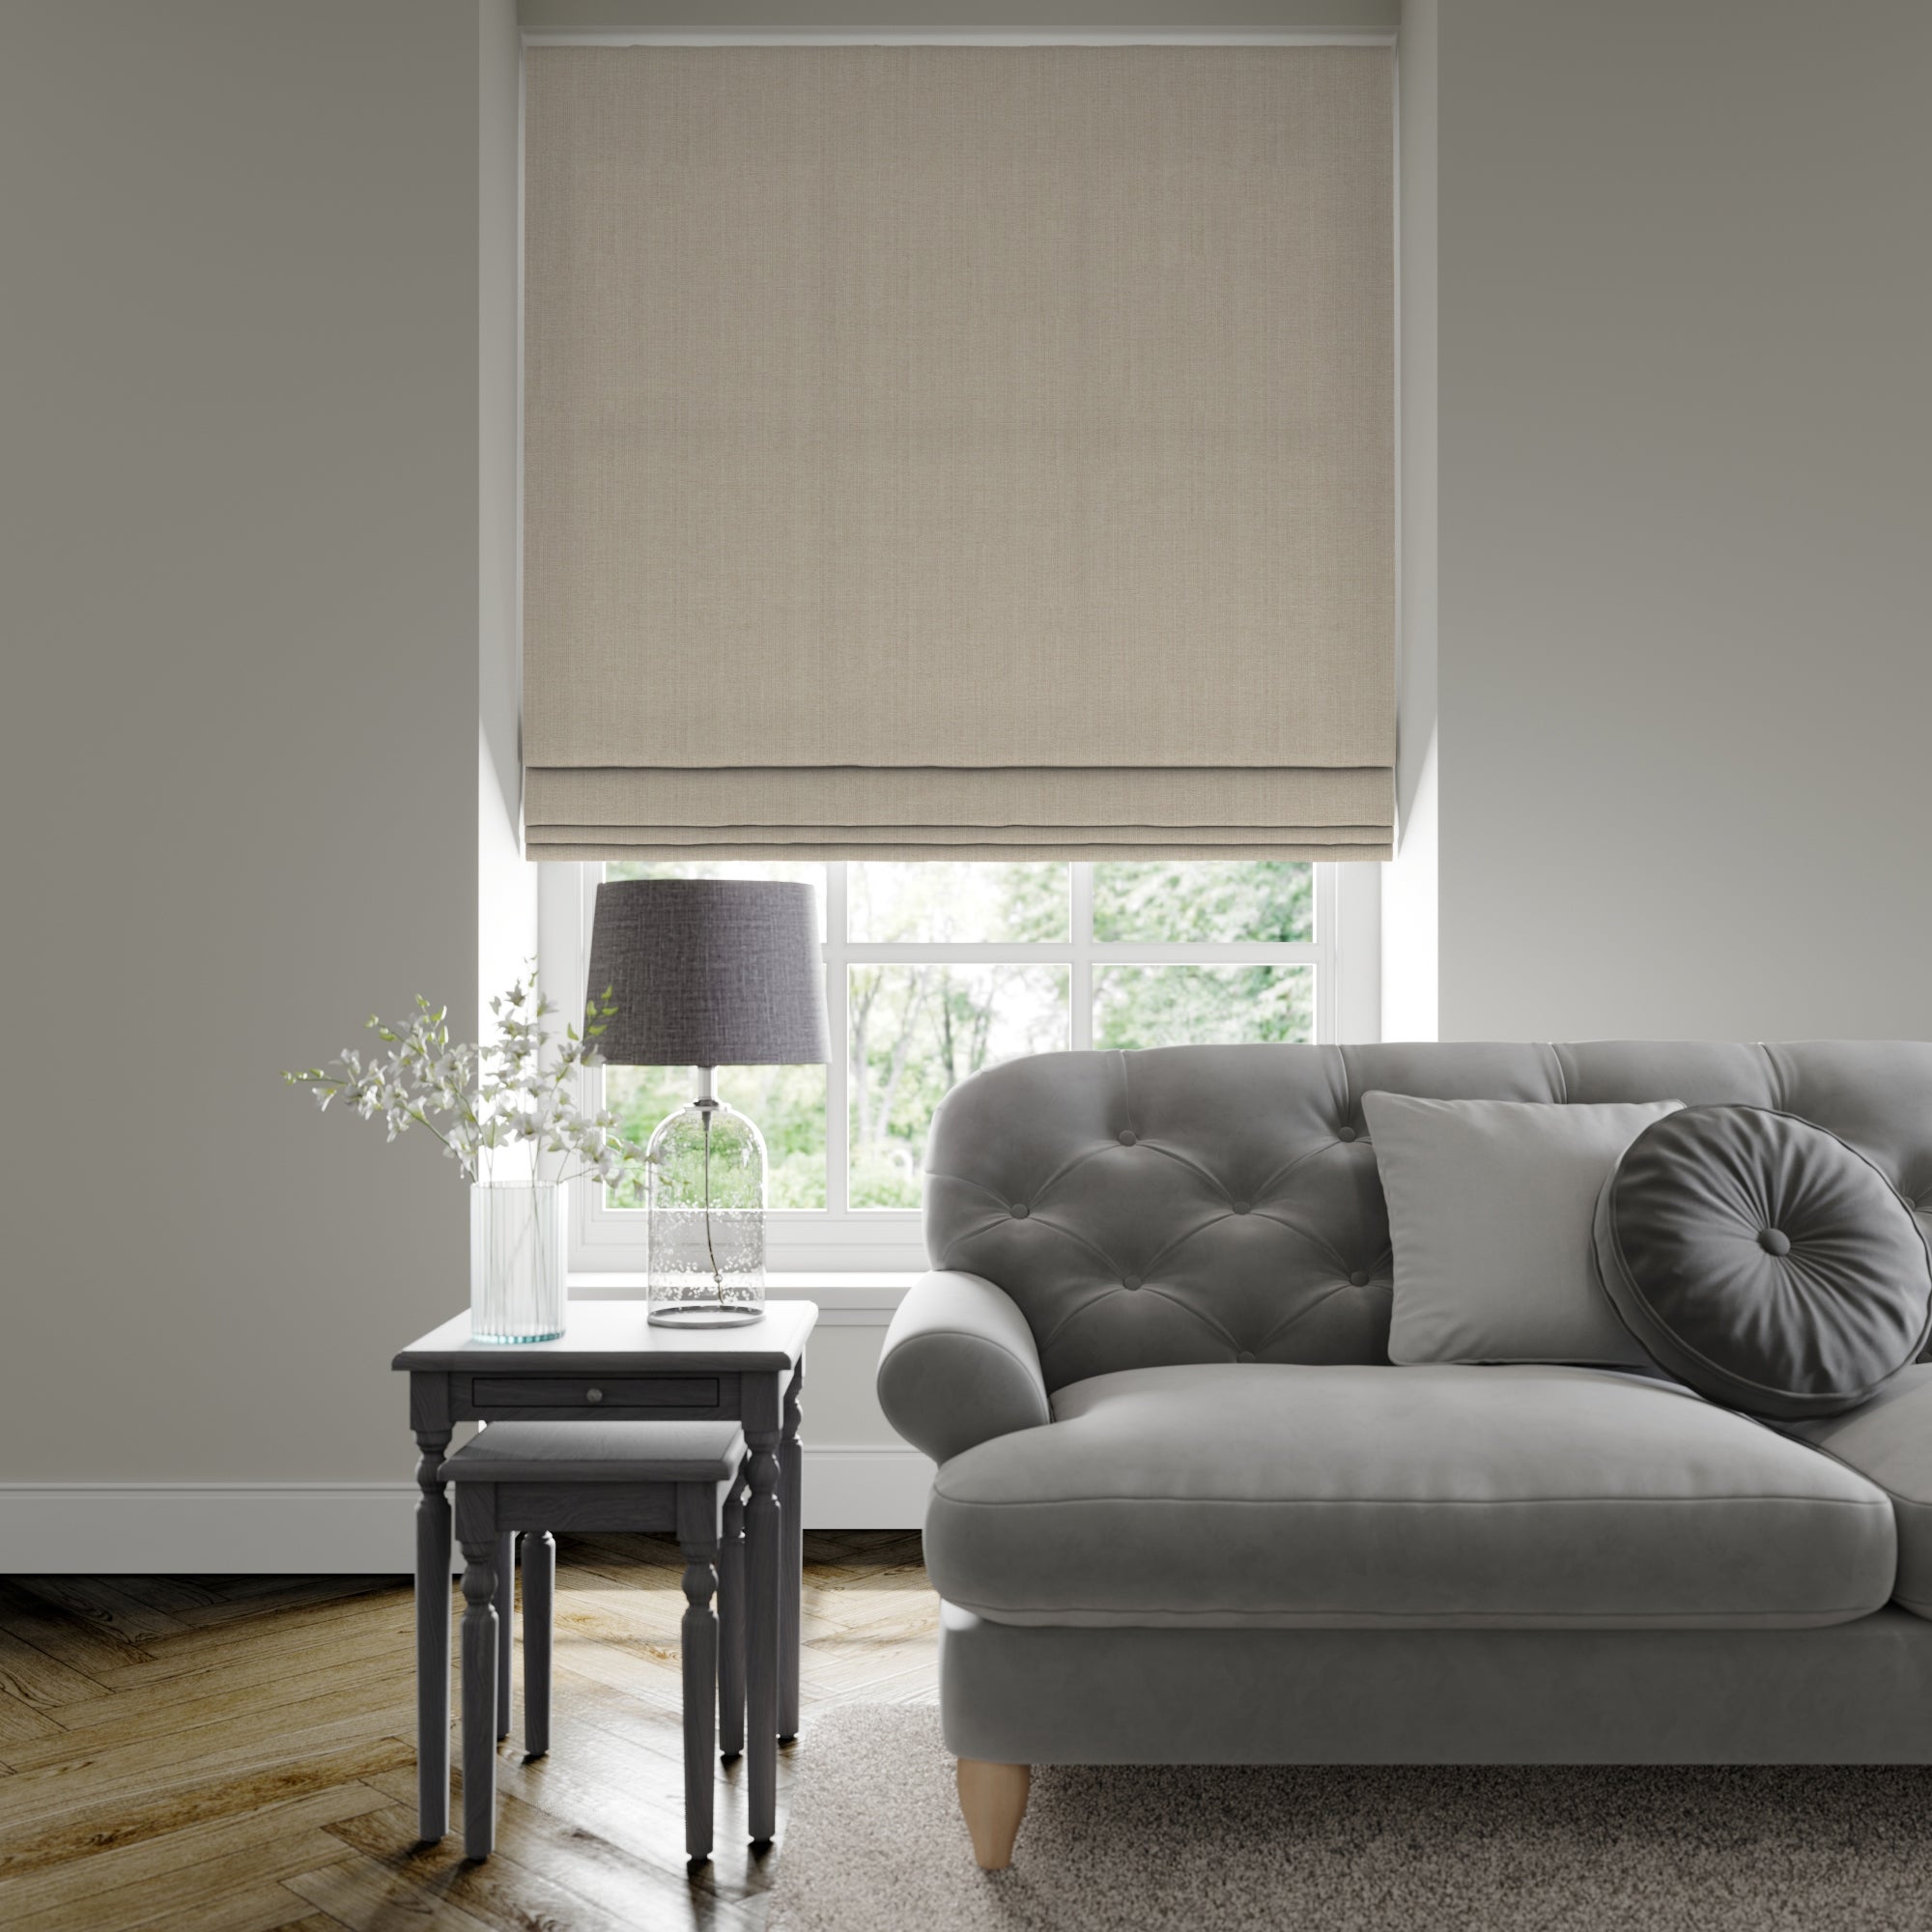 Bowness Made to Measure Roman Blind Bowness Snow